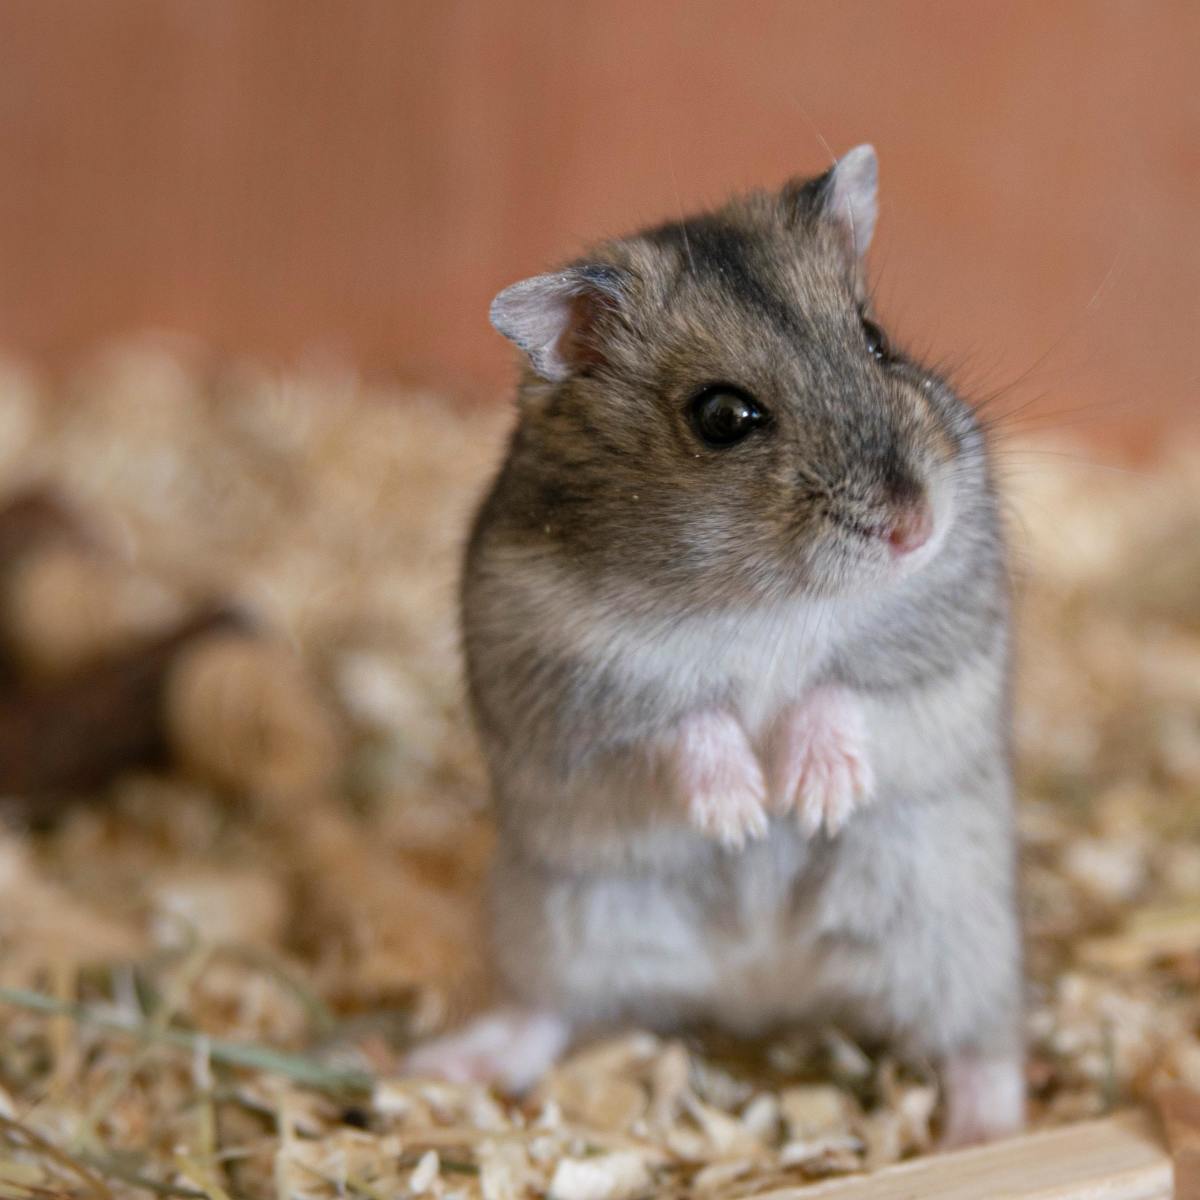 Ringworm pills can cause serious liver damage in hamsters. But for some hard-to-treat spots, topically applied liquid medication may do the trick. 